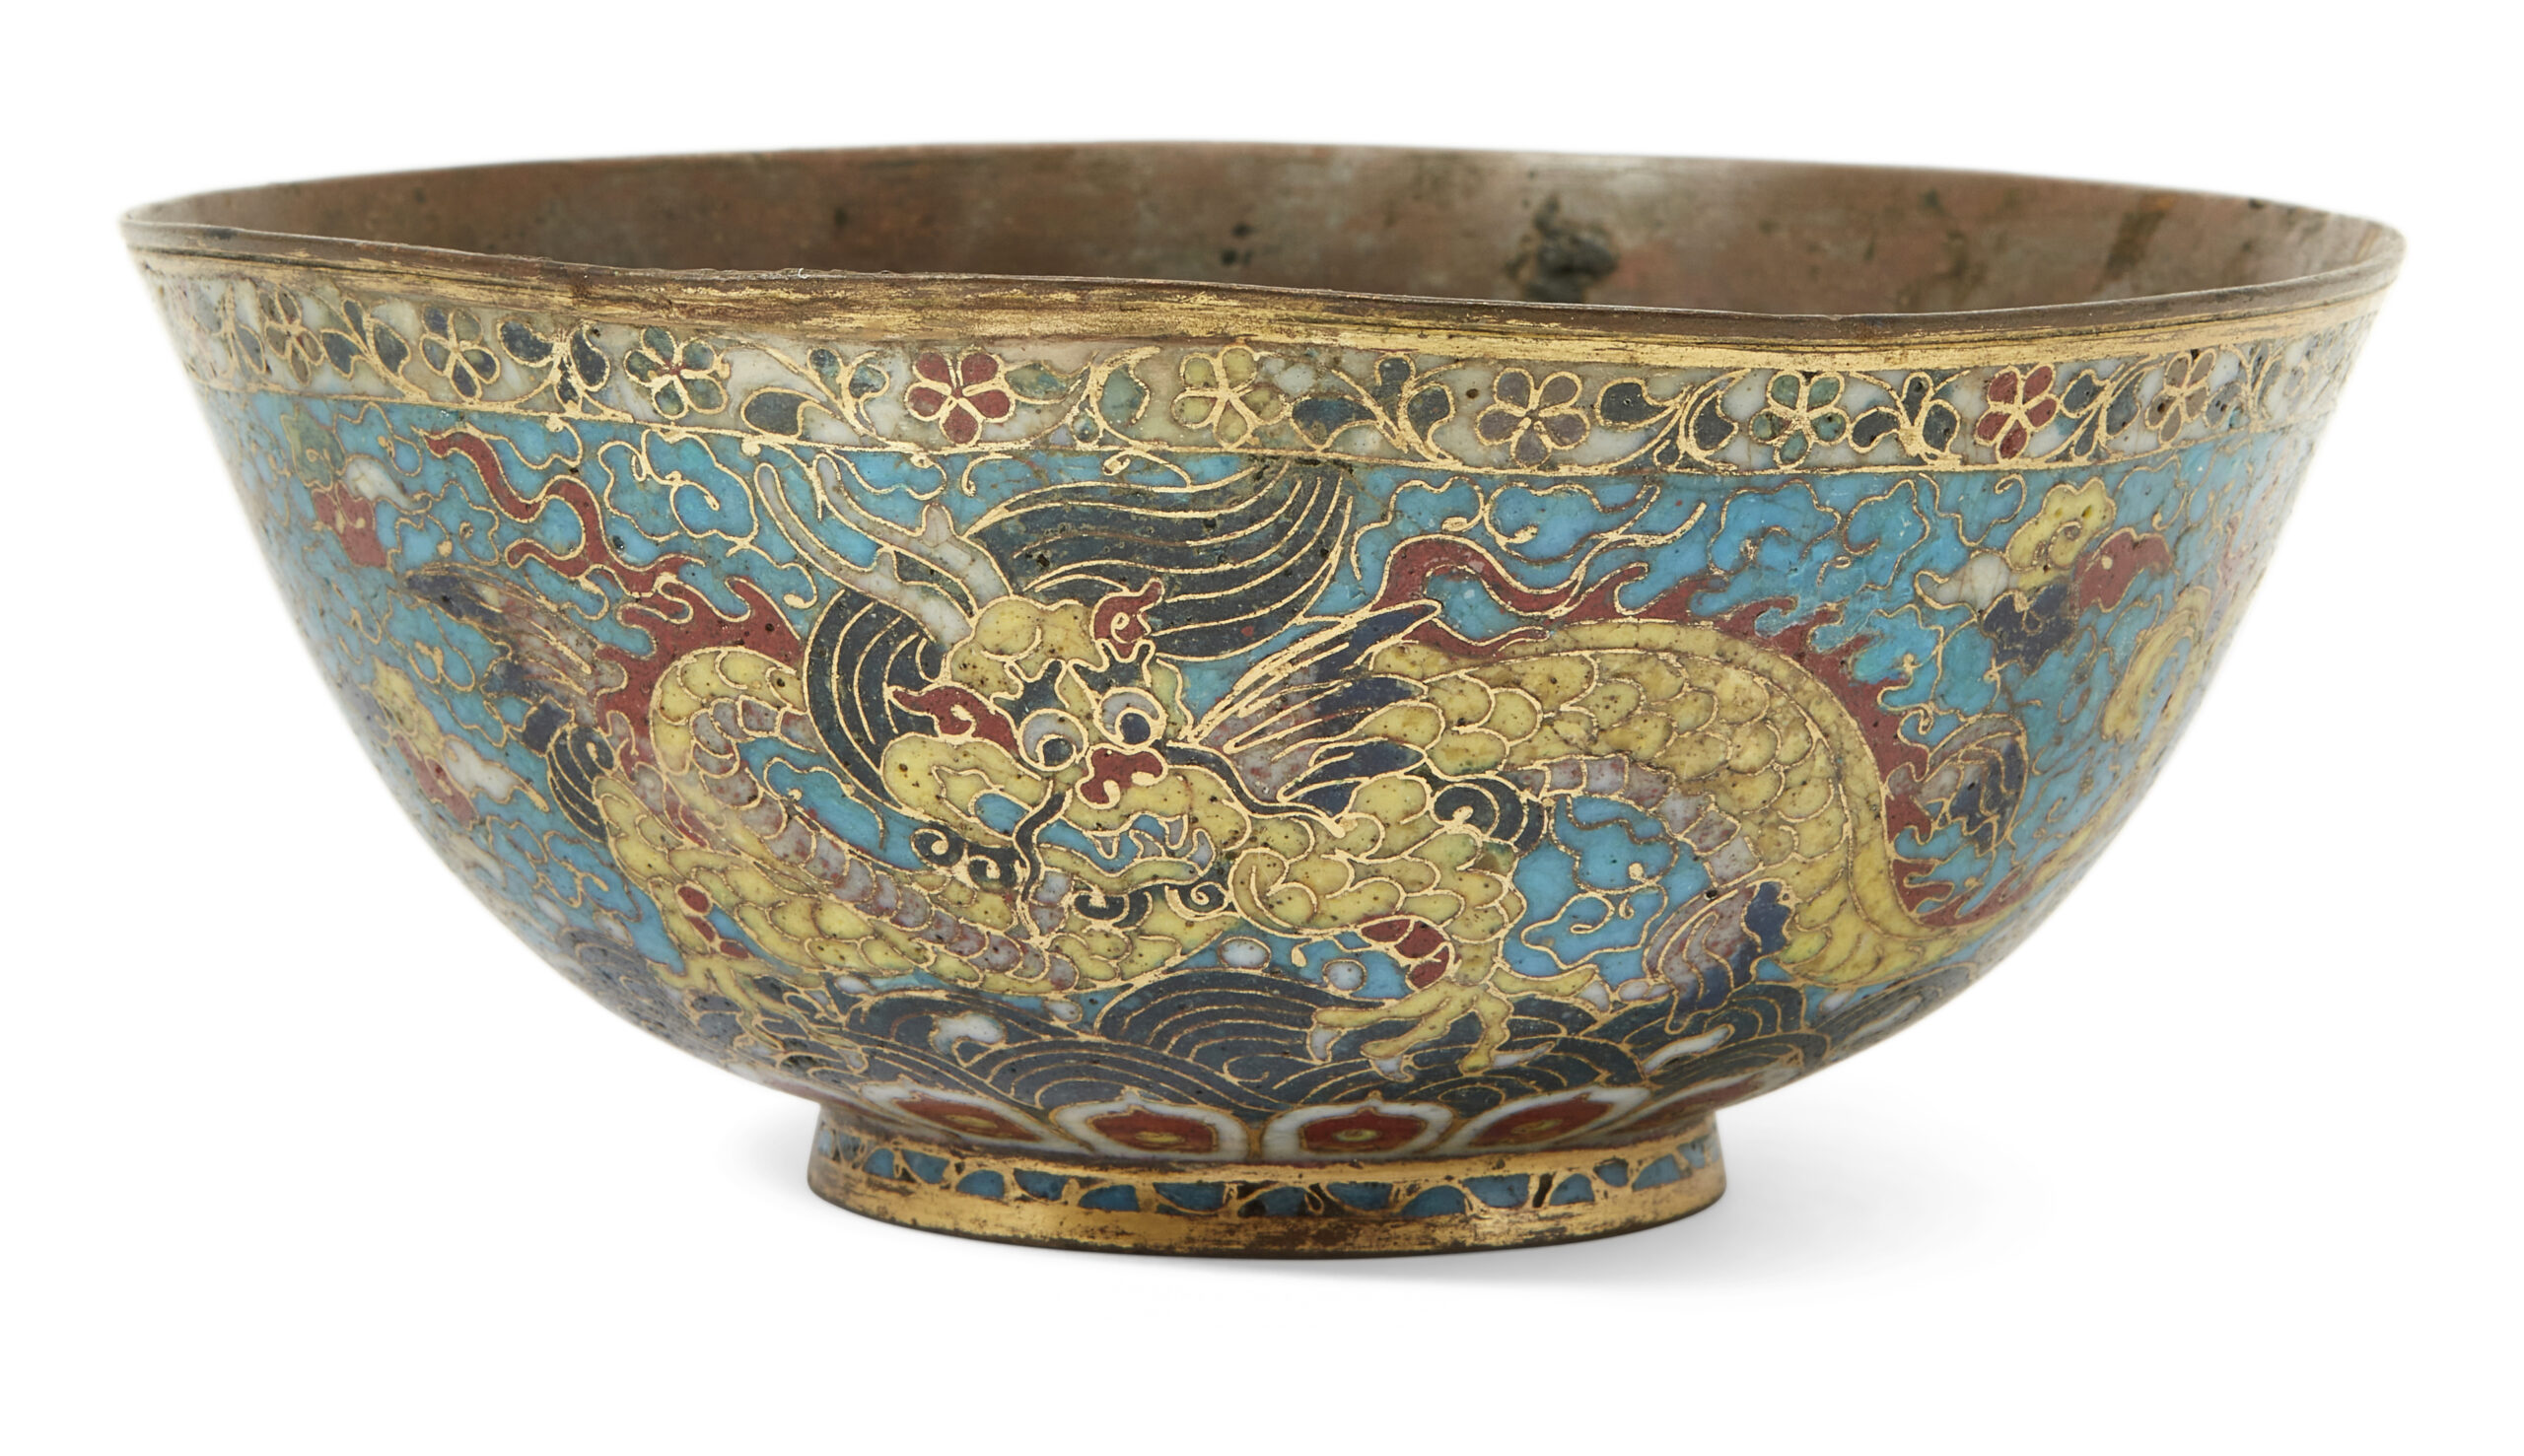 A Chinese 'winged dragons' cloisonné-enamel bowl, 16th century